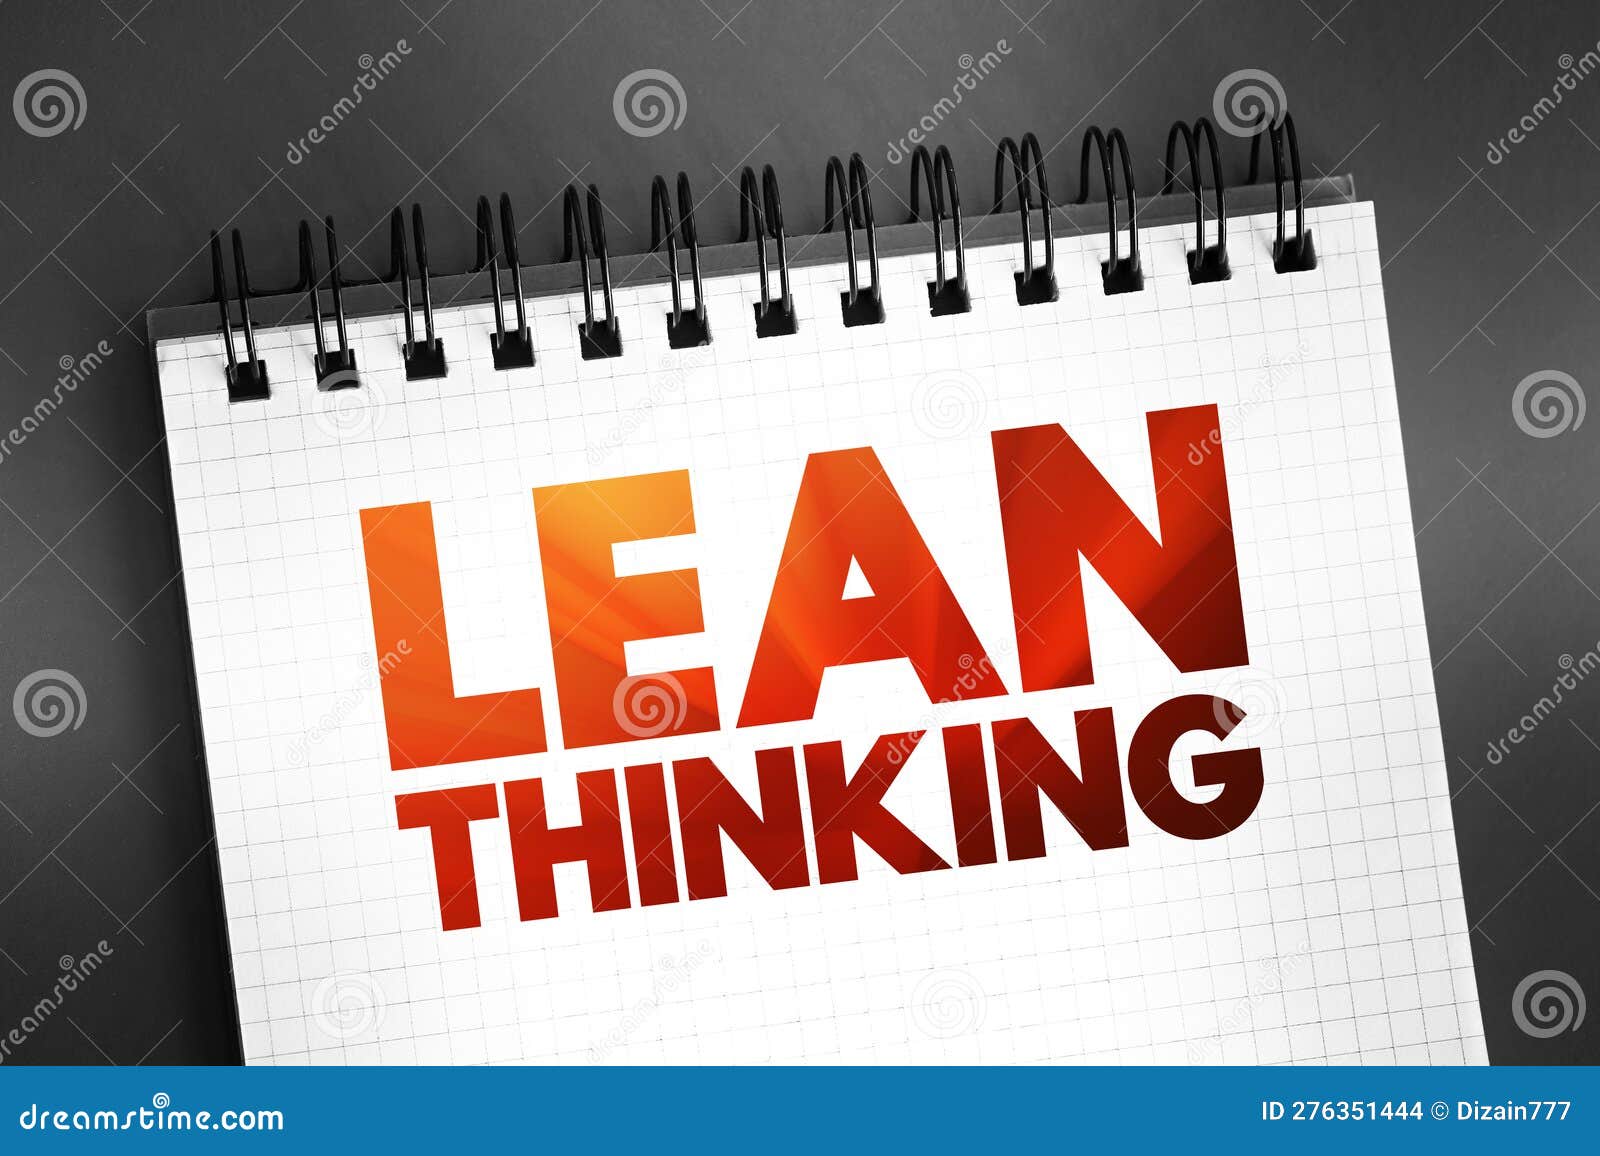 lean thinking - transformational framework that aims to provide a new way how to organize human activities to deliver more